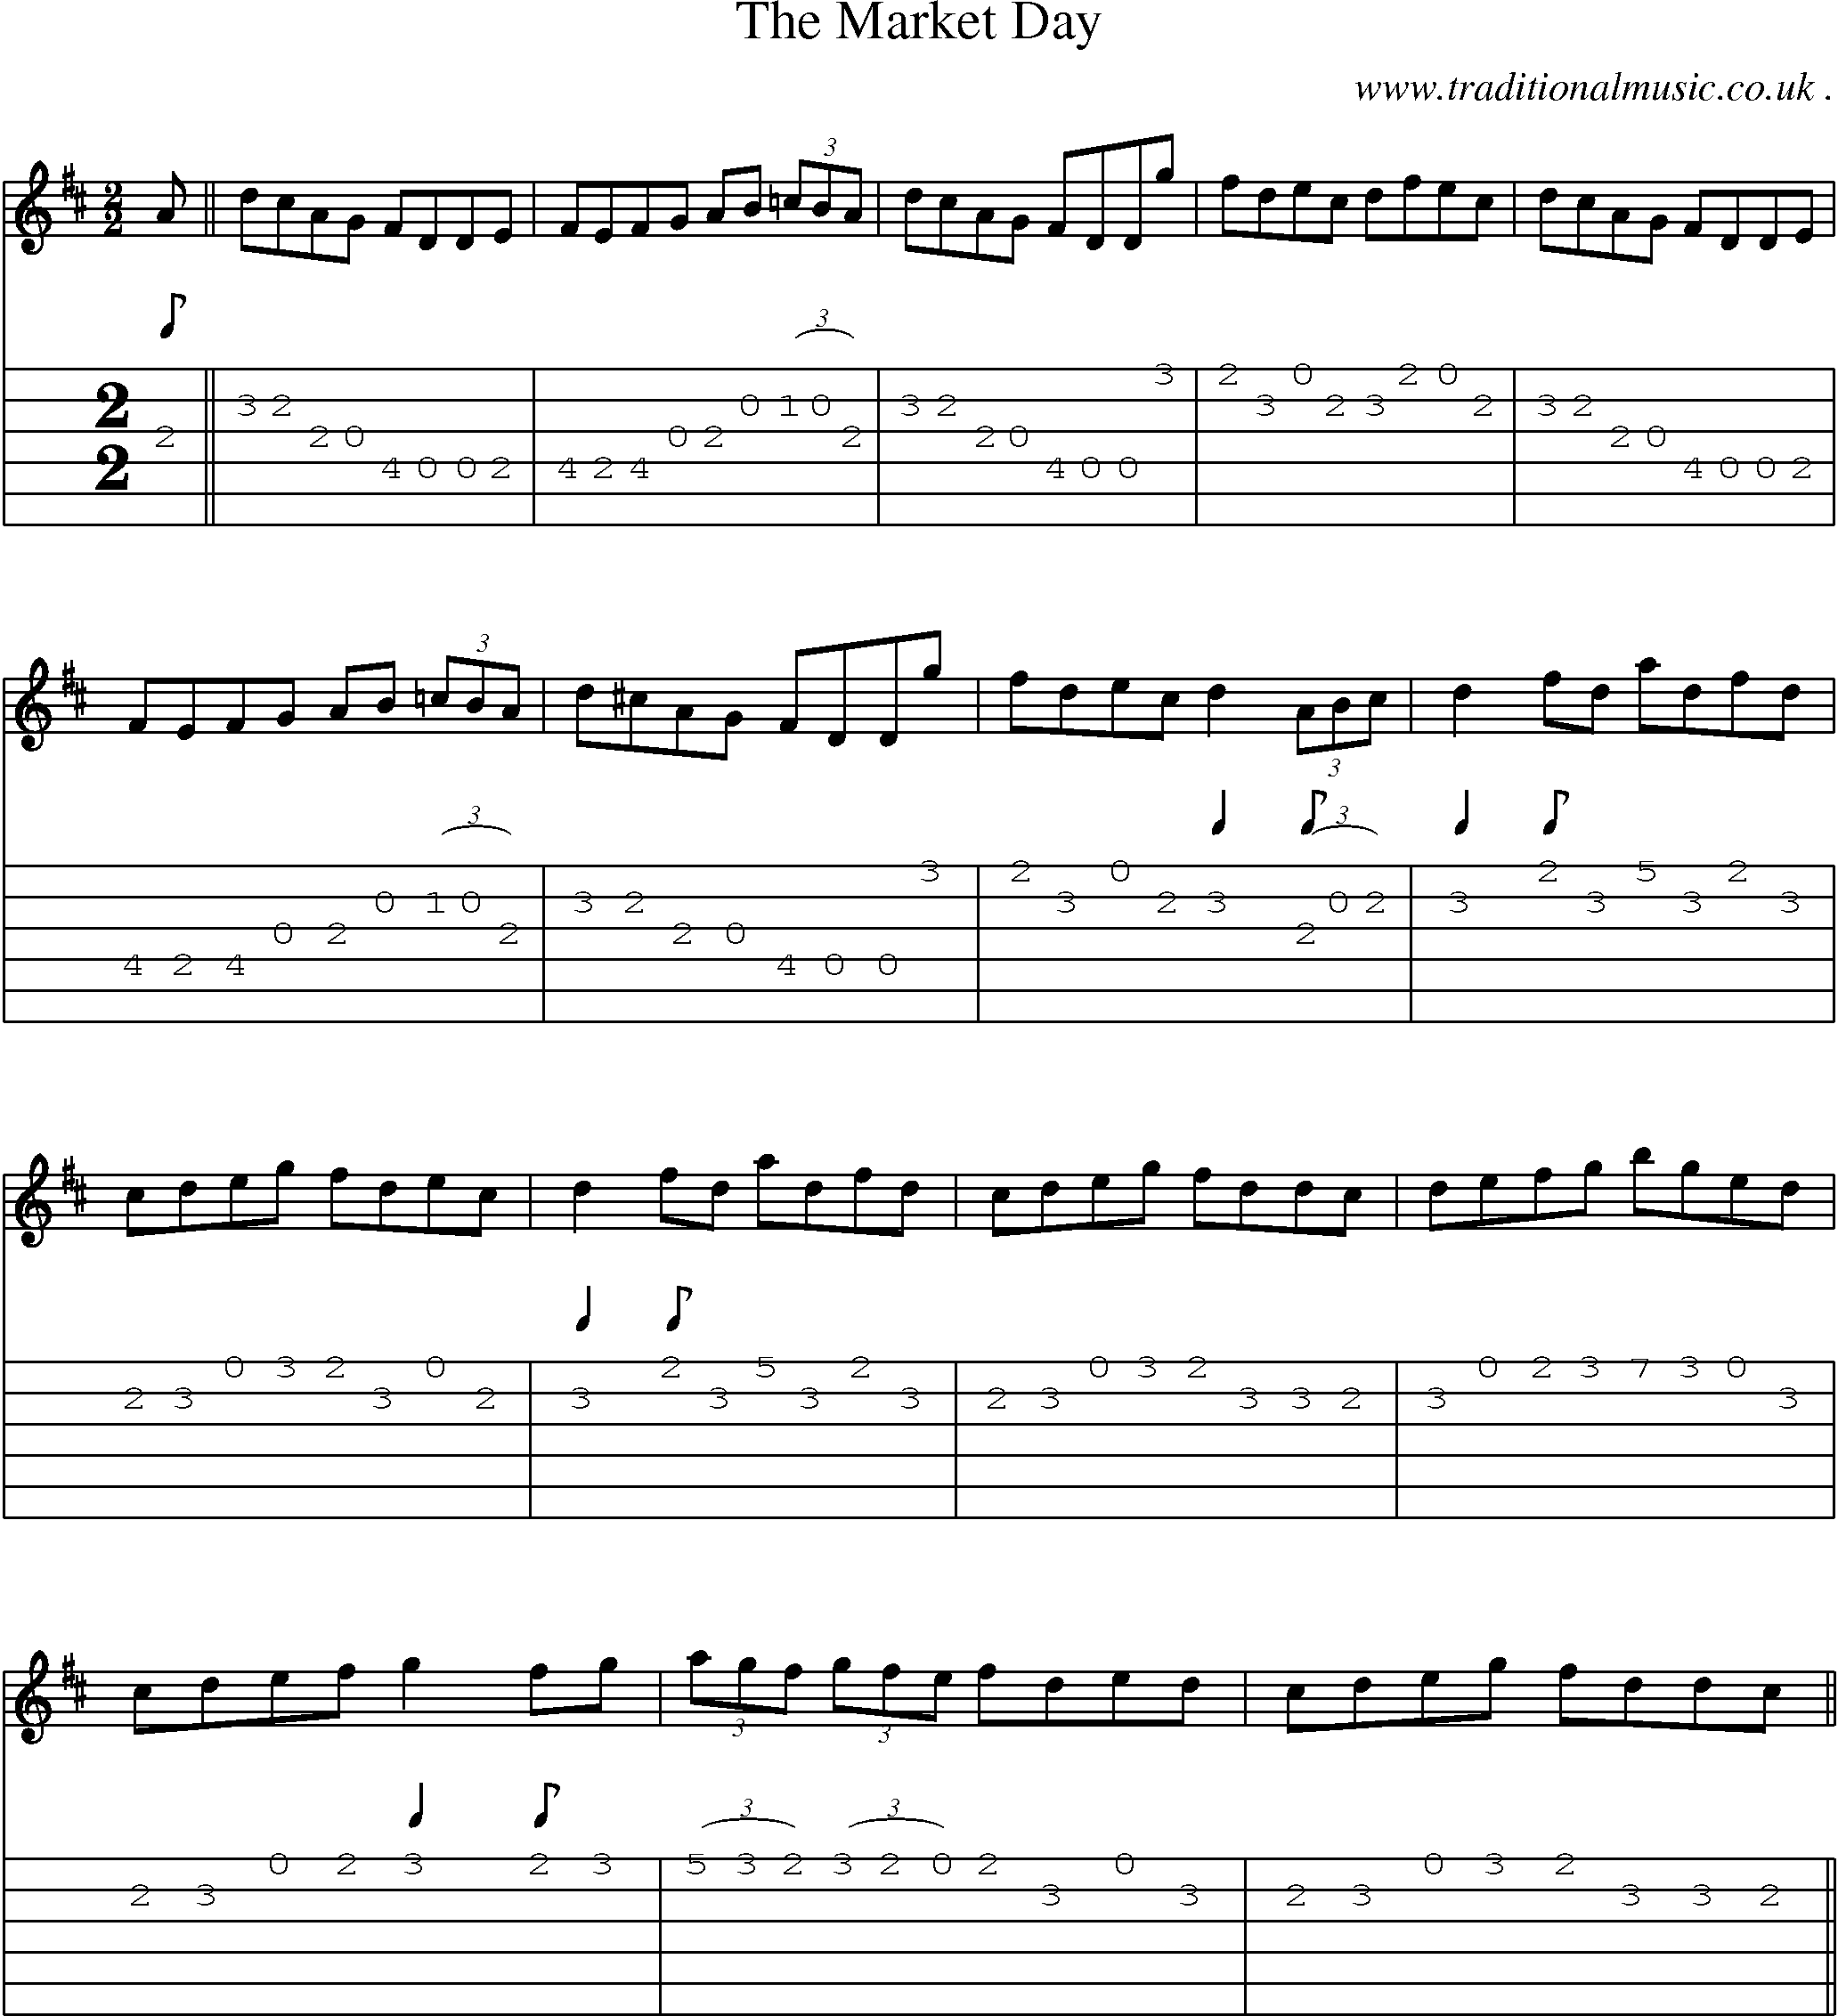 Sheet-Music and Guitar Tabs for The Market Day